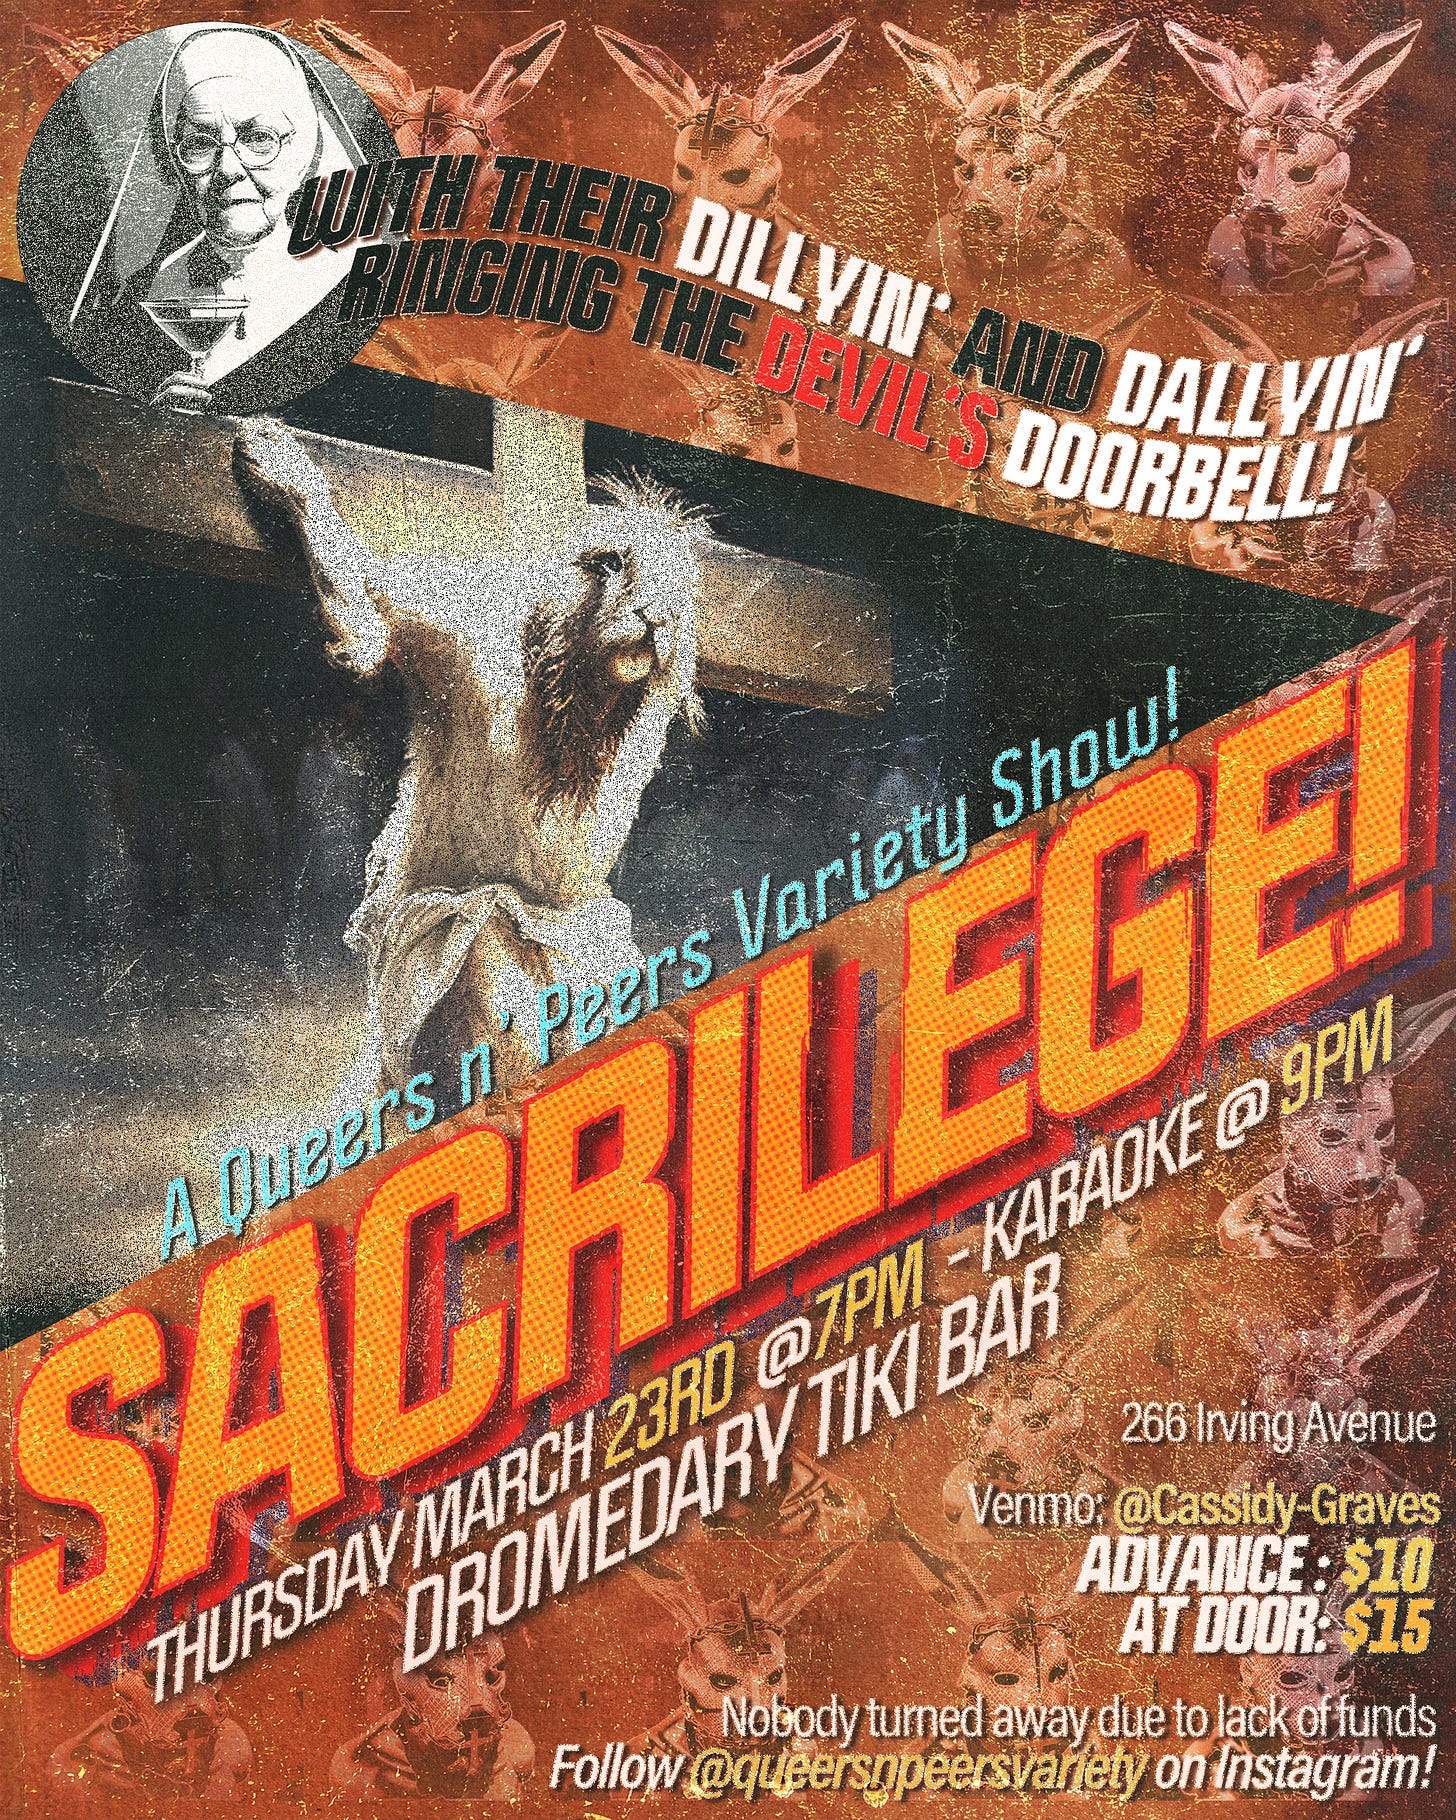 poster for Queers N Peers: Sacrilege on Thursday, 3/23 at Dromedary Bar